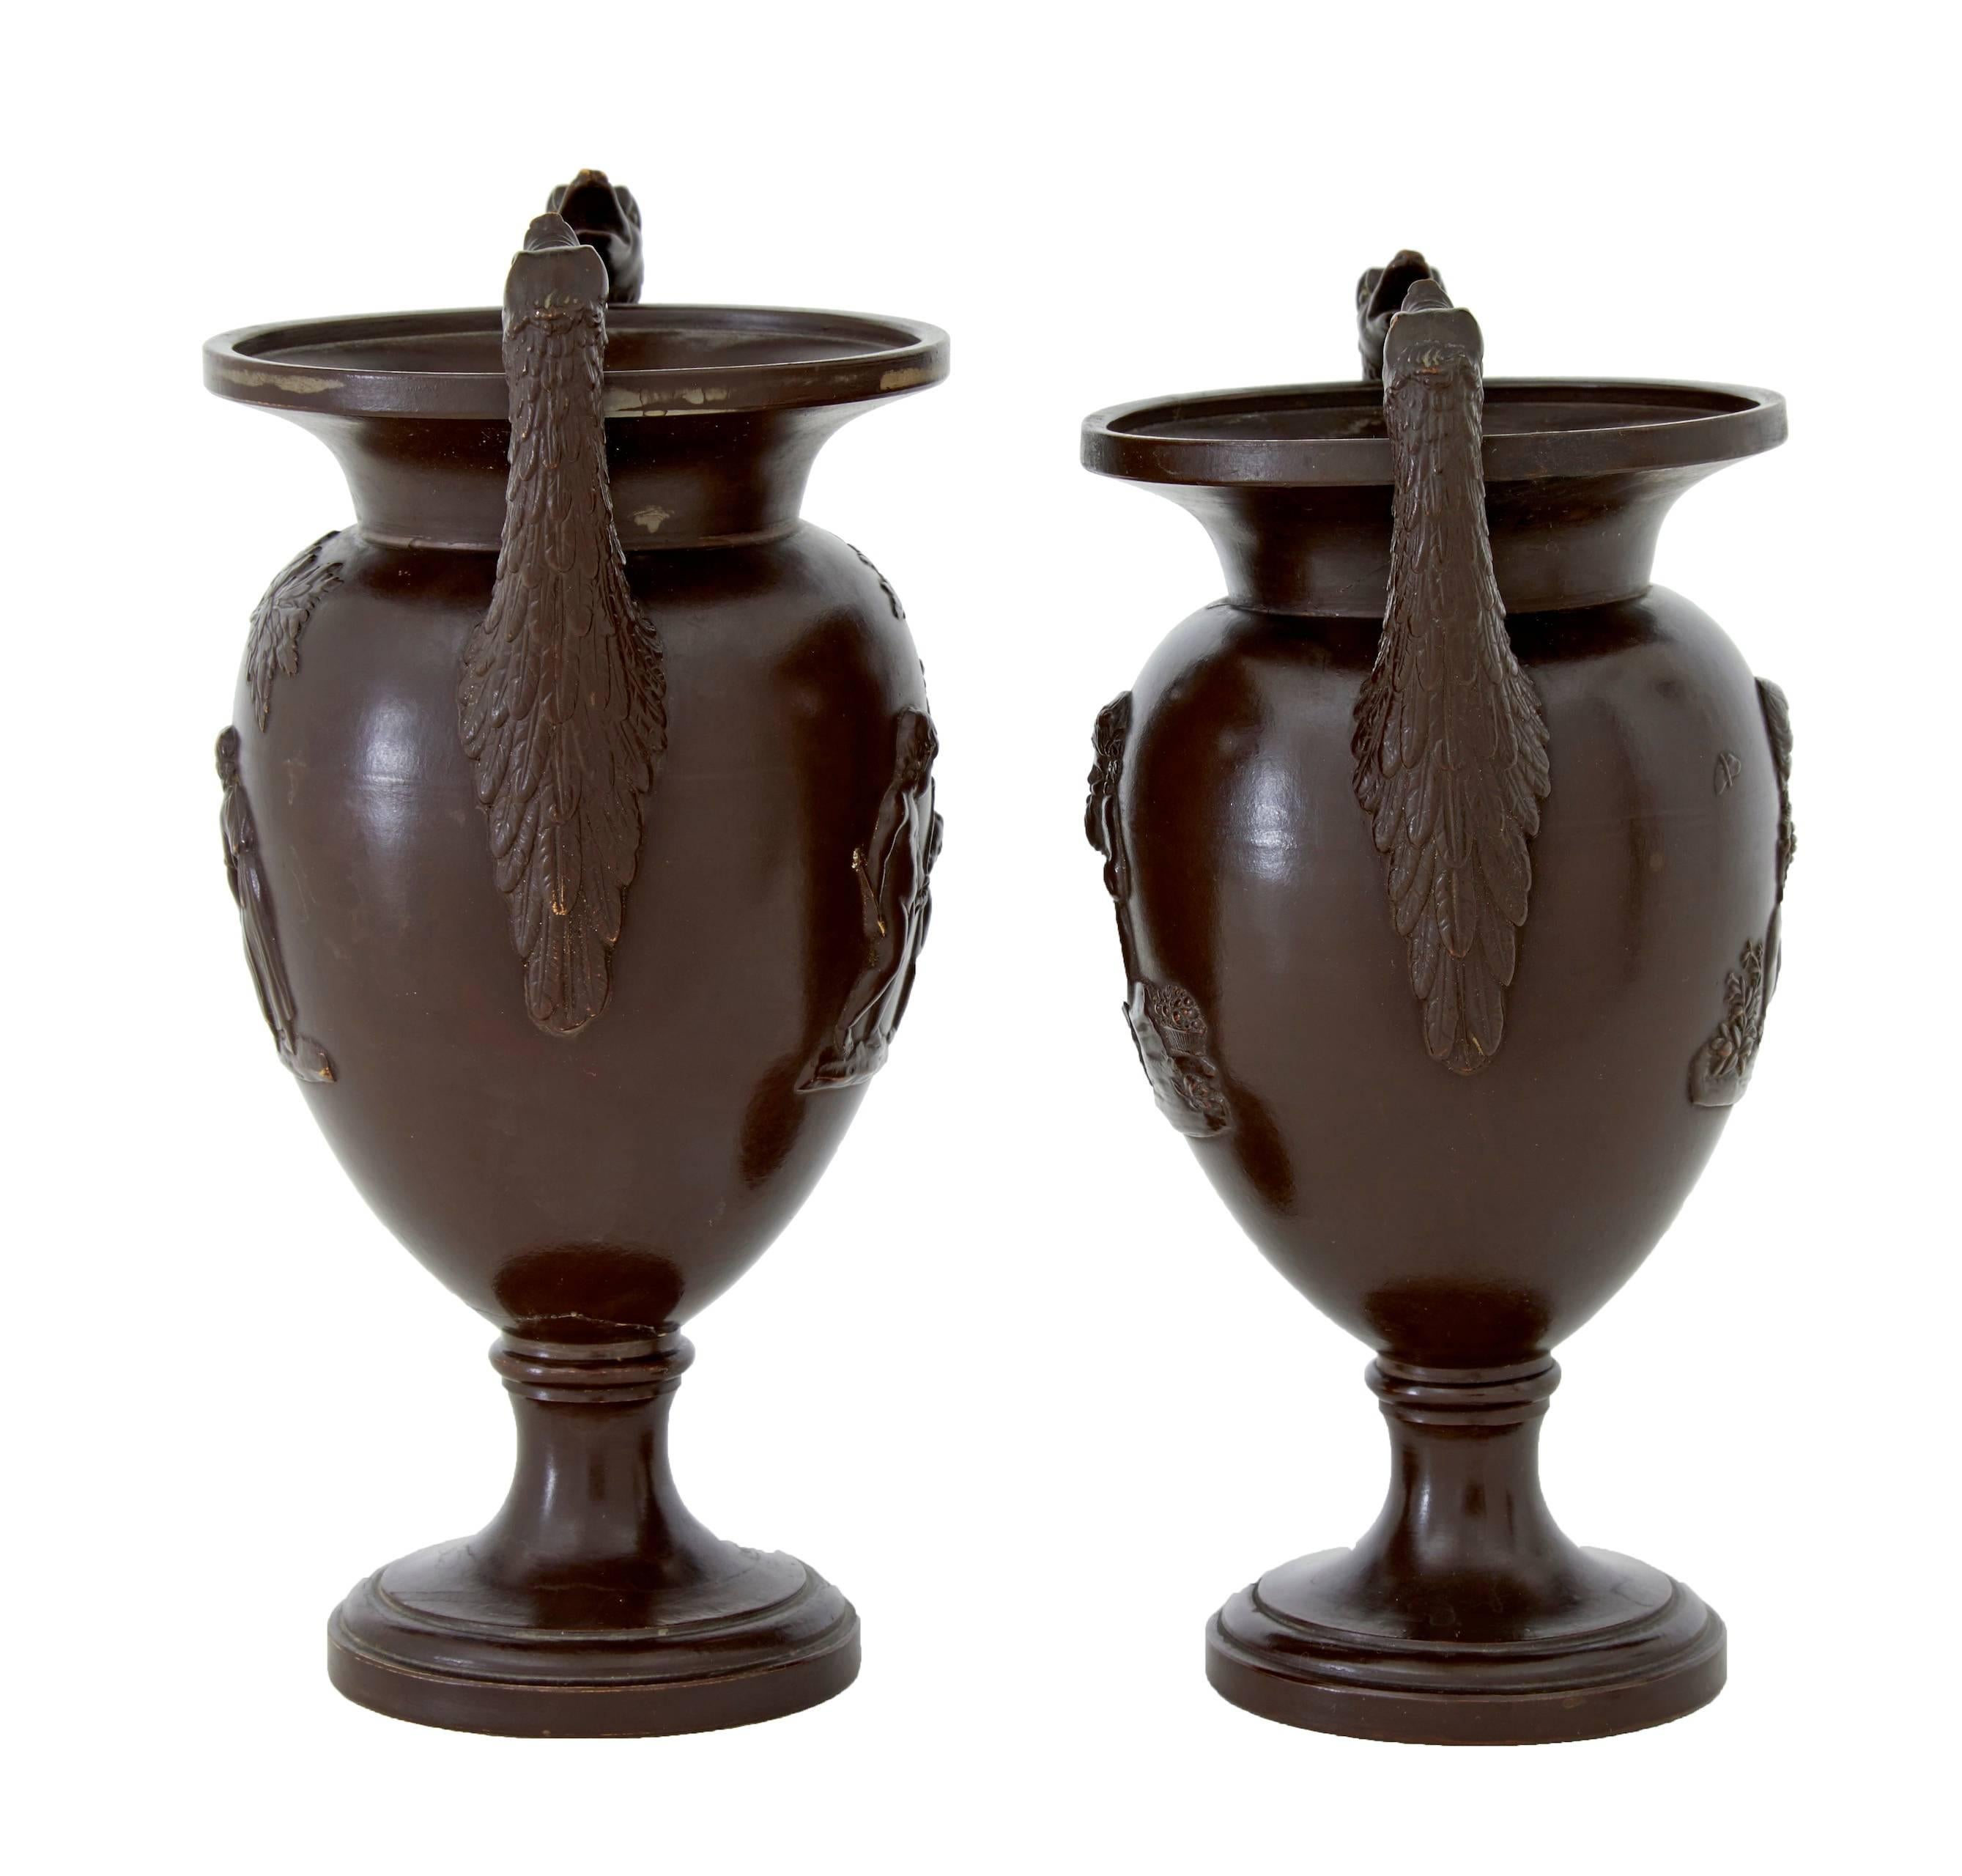 A near pair of urn vases stamped underneath s&g, circa 1930. Applied long necked bird handles, decorated with child scenes. Glazed to look like bronze. Repair to one lip and a repair with minor losses to the stem, (photographed).

Measures: Height